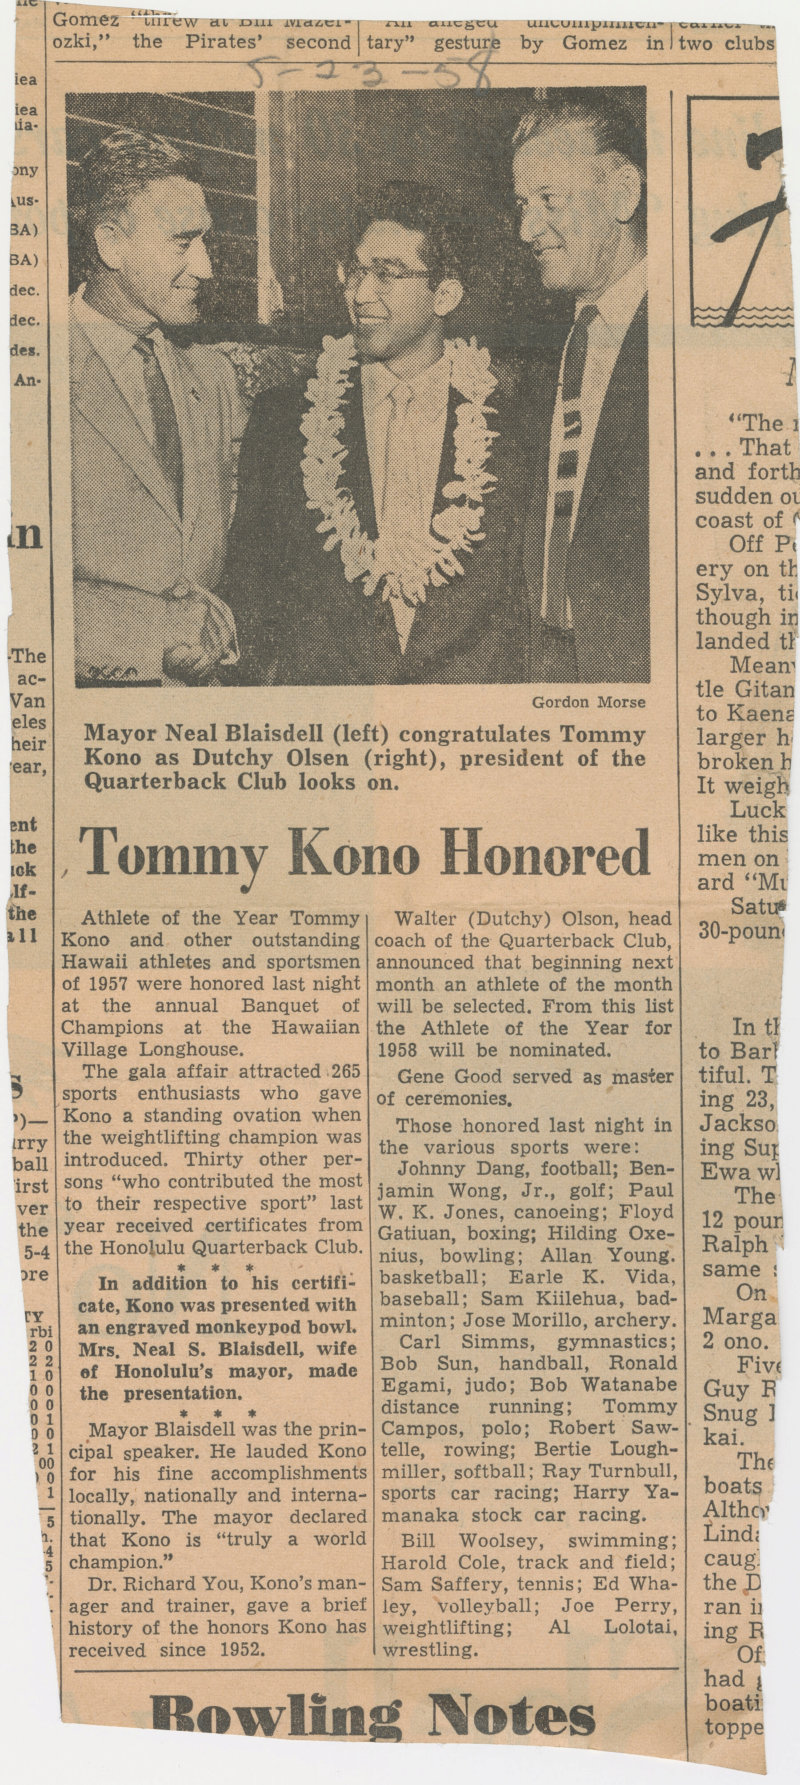 Tommy Kono Honored